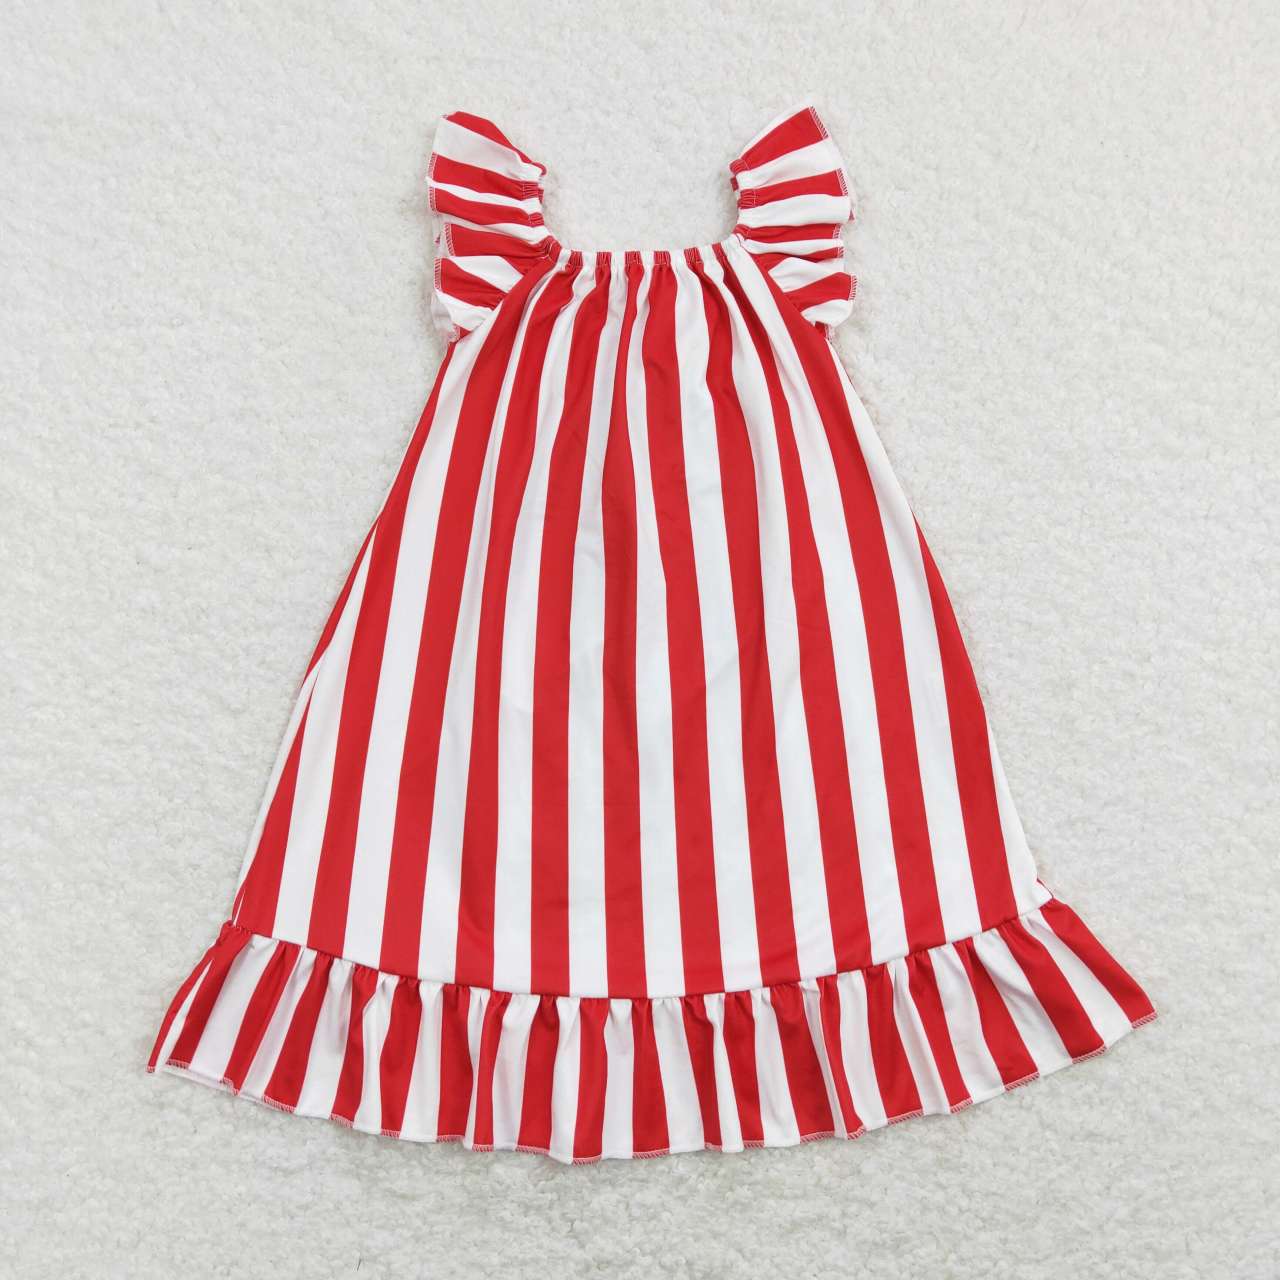 4th of july red stripe dress with bow